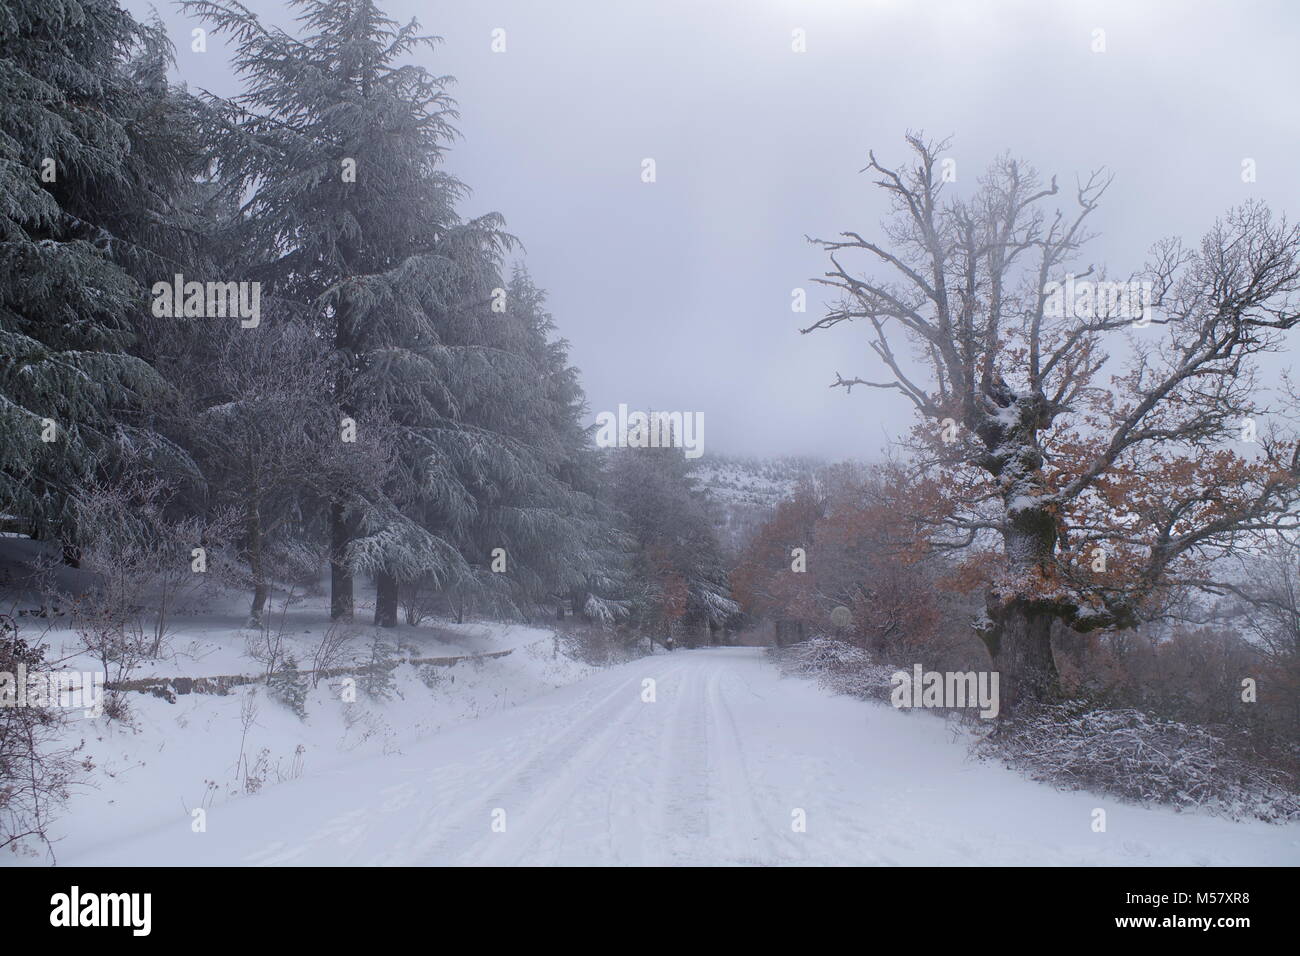 Winter mountain landscape, all covered in snow. Snow-covered trees and roads, pines, firs and shrubs. Detail of icy branches. Kingdom of ice. Stock Photo